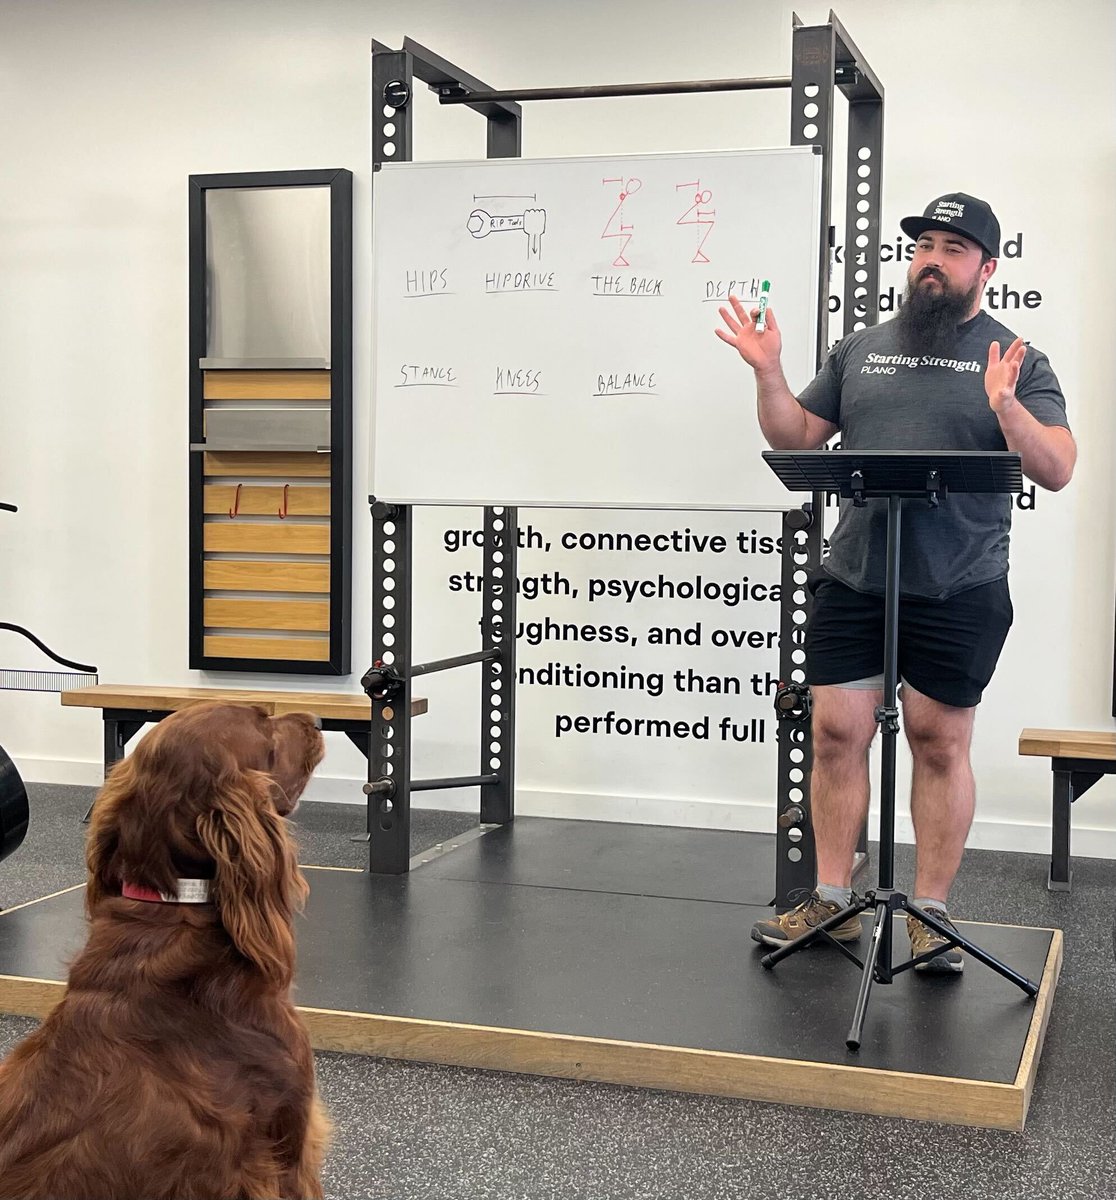 As coaches we are Always honing our understanding of the model. Here's Coach Morgan giving a break down of the Squat Model to our very attentive assistant Coach Copper! 
#squat #planogym #startingstrength #startingstrengthgyms #themodel #startingstrengthmodel #gymsplano #hipdrive